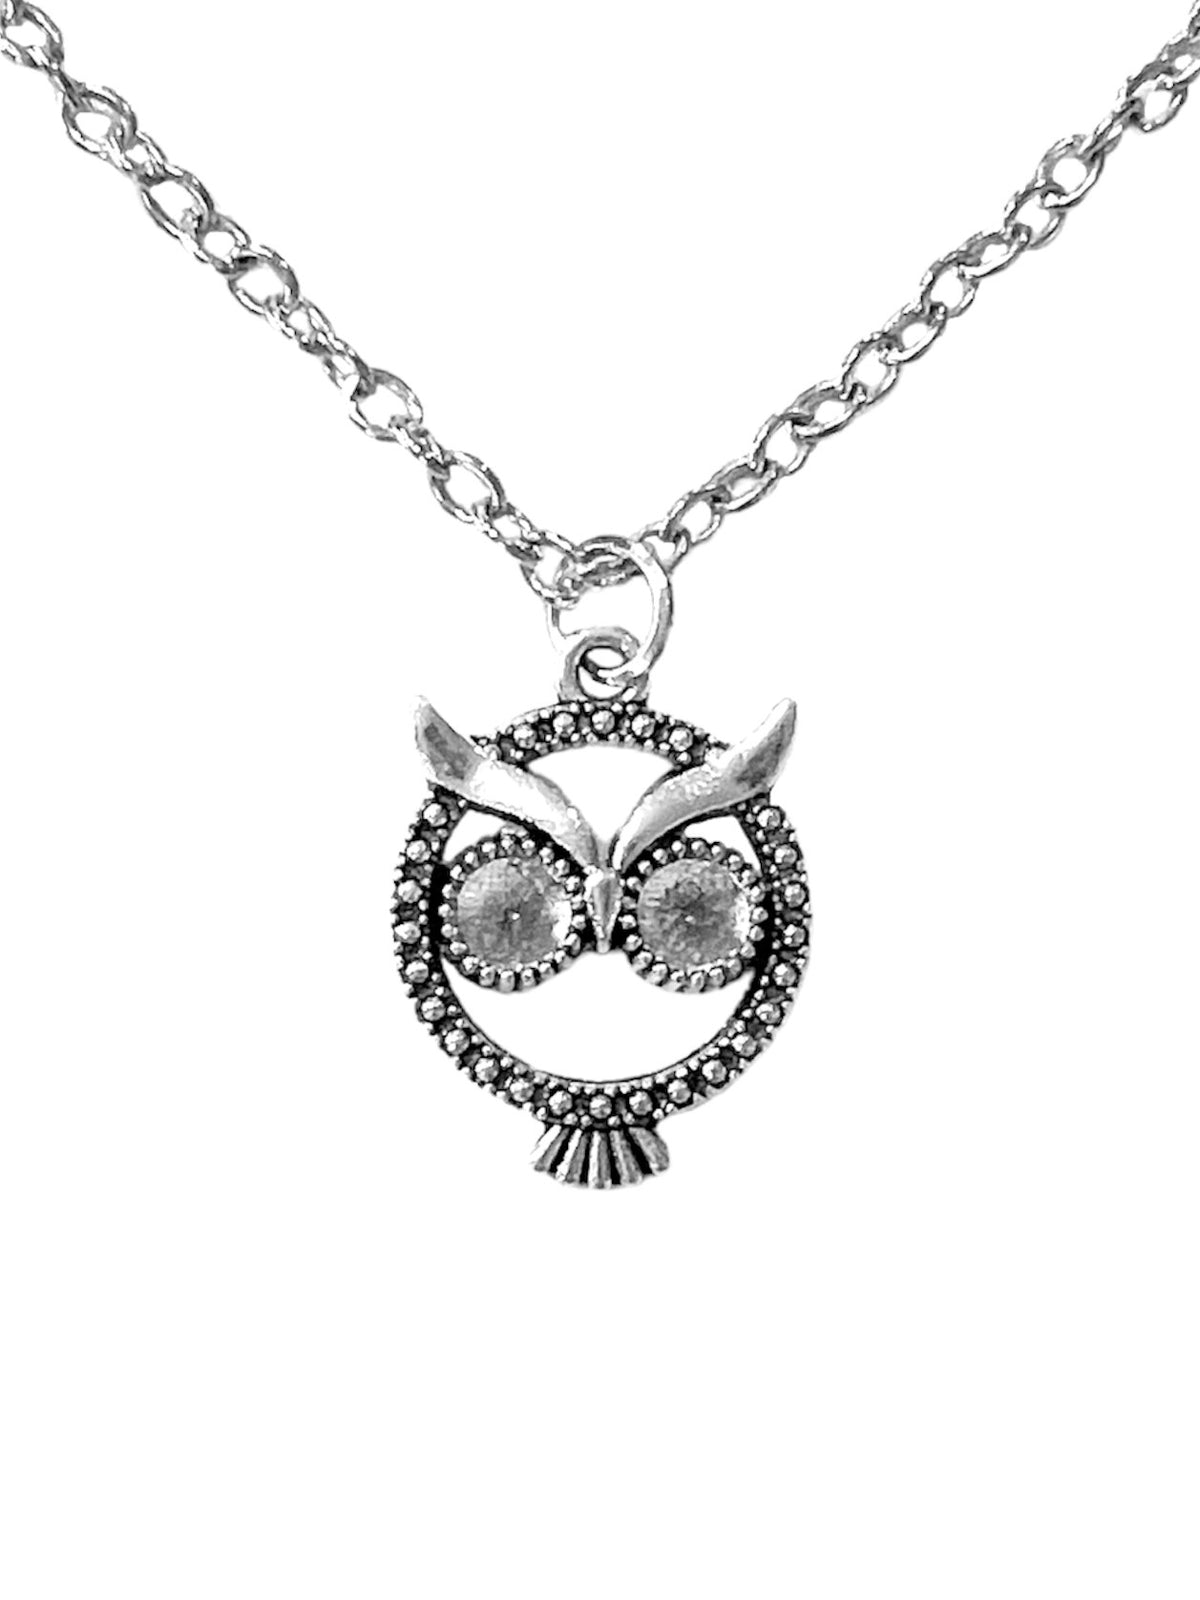 The Wise Owl Message Necklace